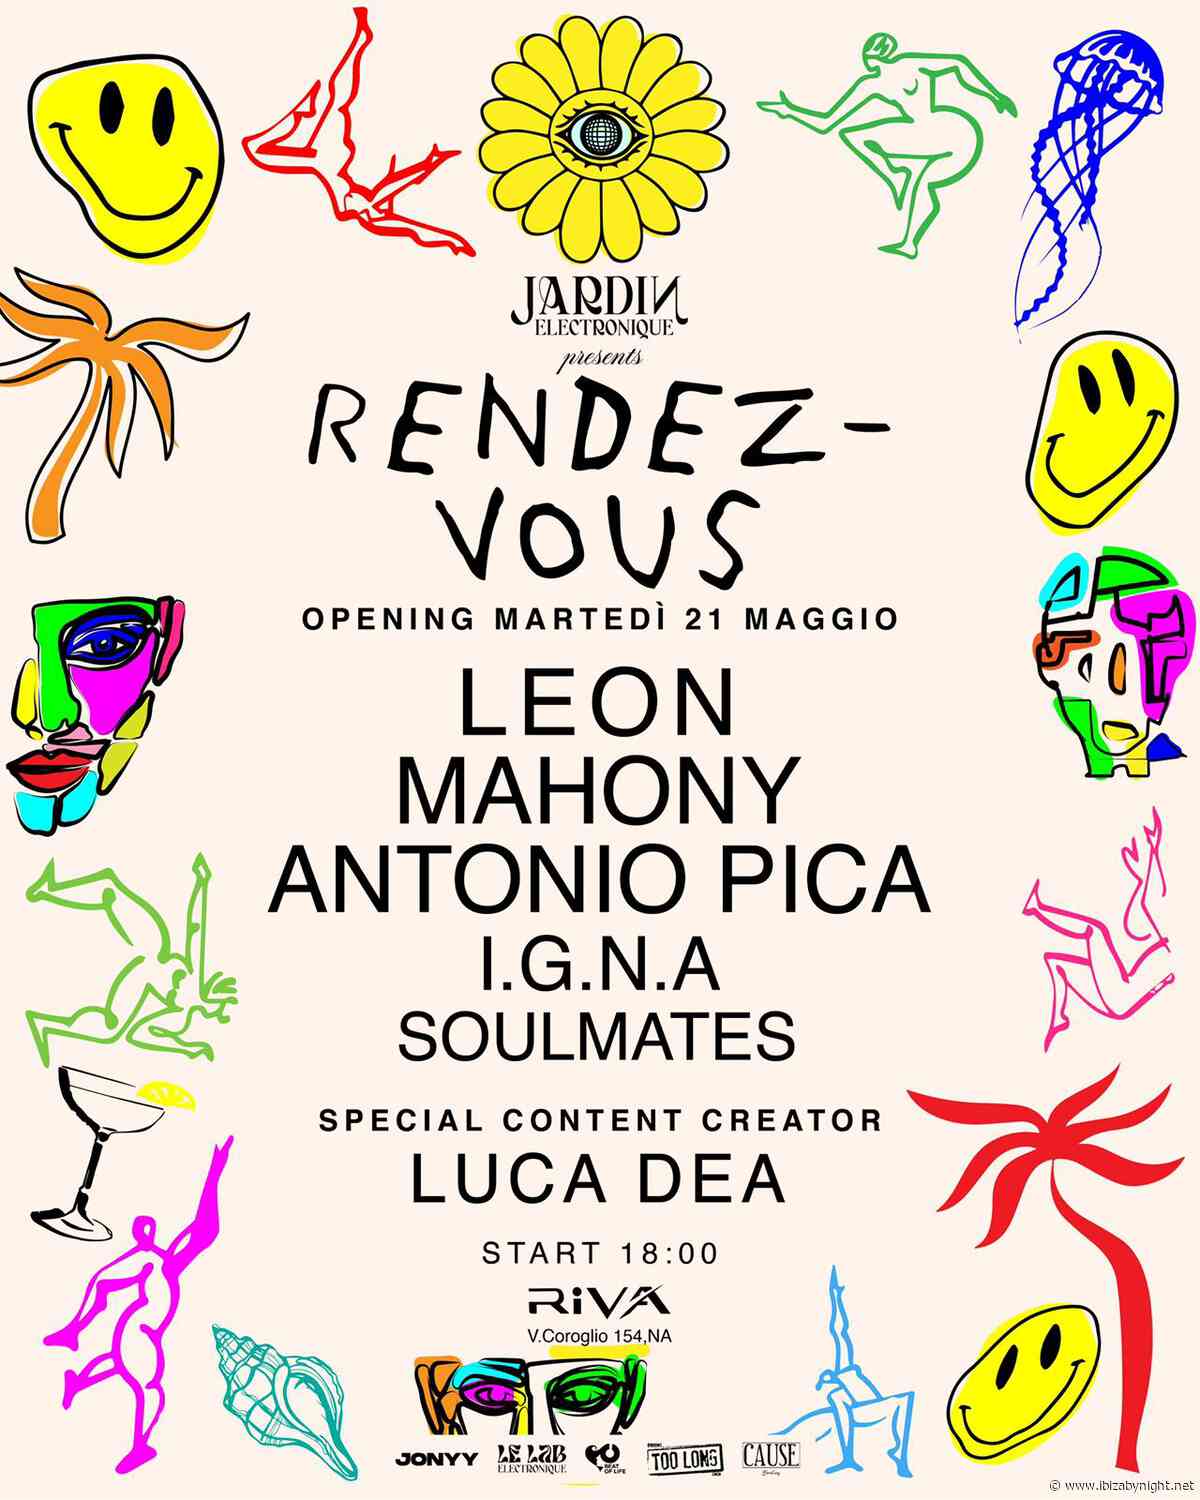 Jardin  Electronique presents Rendez-vous, the opening party, with Leon, Antonio Pica, Mahony, I.G.N.A. & many more!